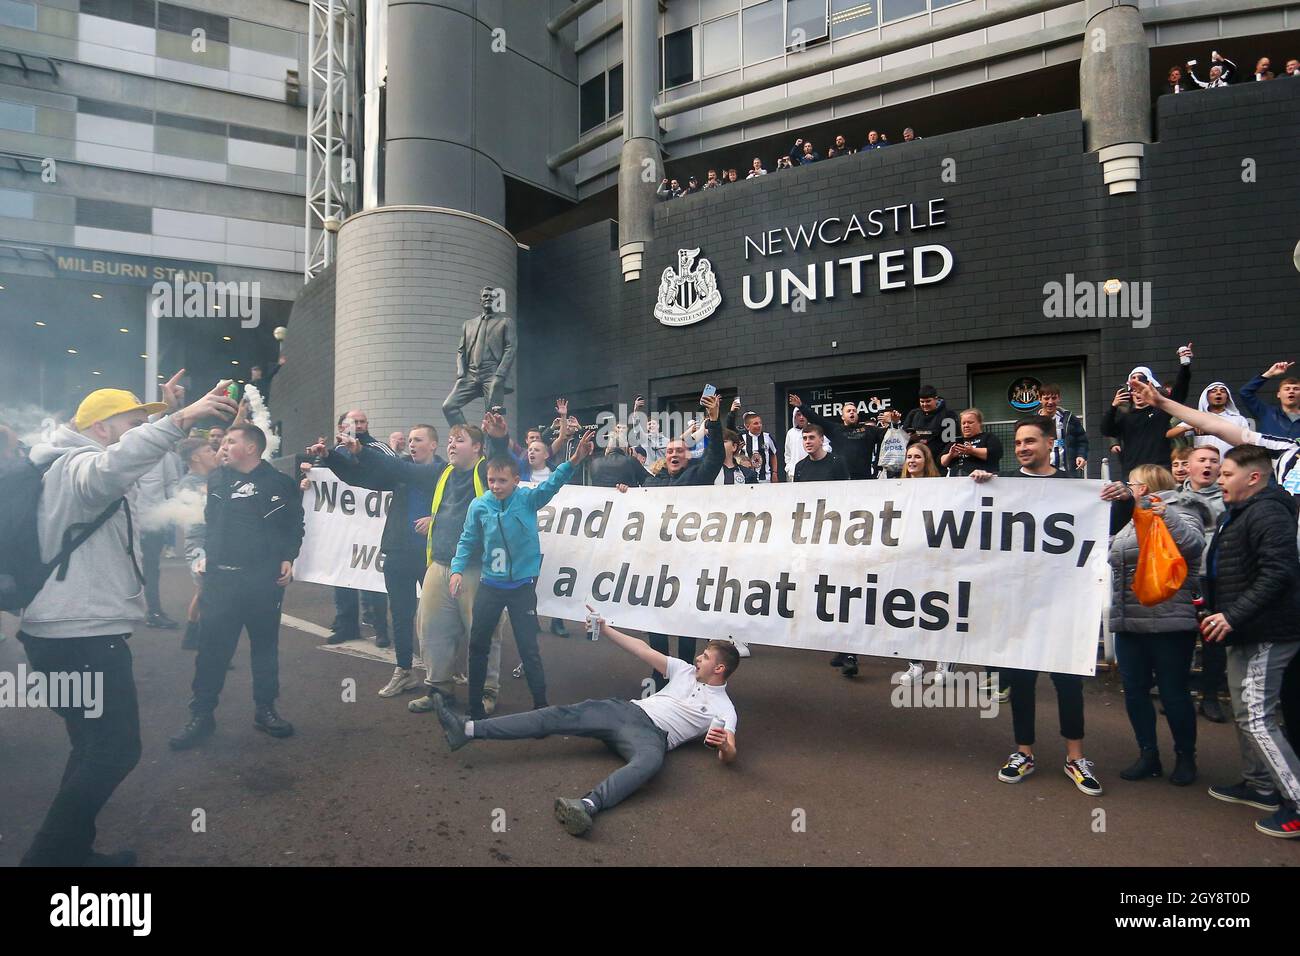 NEWCASTLE UPON TYNE, UK. OCT 7TH Newcastle United fans celebrate the sale of the club to the Consortium of Amanda Stavely, Jamie Rueben and PIFScenes at St. James's Park, Newcastle as news of a takeover emerges on Thursday 7th October 2021. (Credit: Michael Driver | MI News) Credit: MI News & Sport /Alamy Live News Stock Photo